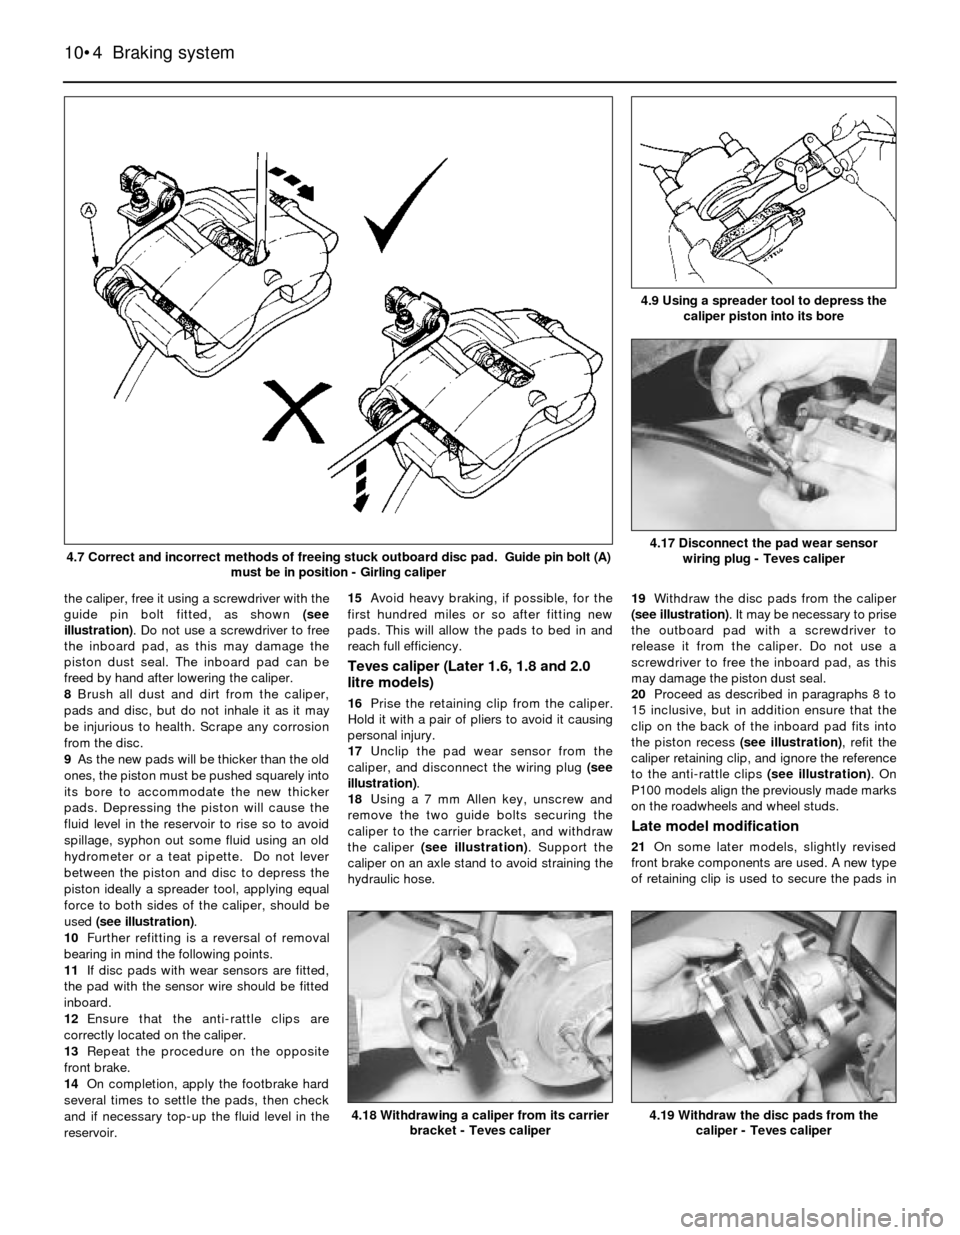 FORD SIERRA 1990 2.G Braking System Workshop Manual the caliper, free it using a screwdriver with the
guide pin bolt fitted, as shown (see
illustration). Do not use a screwdriver to free
the inboard pad, as this may damage the
piston dust seal. The inb